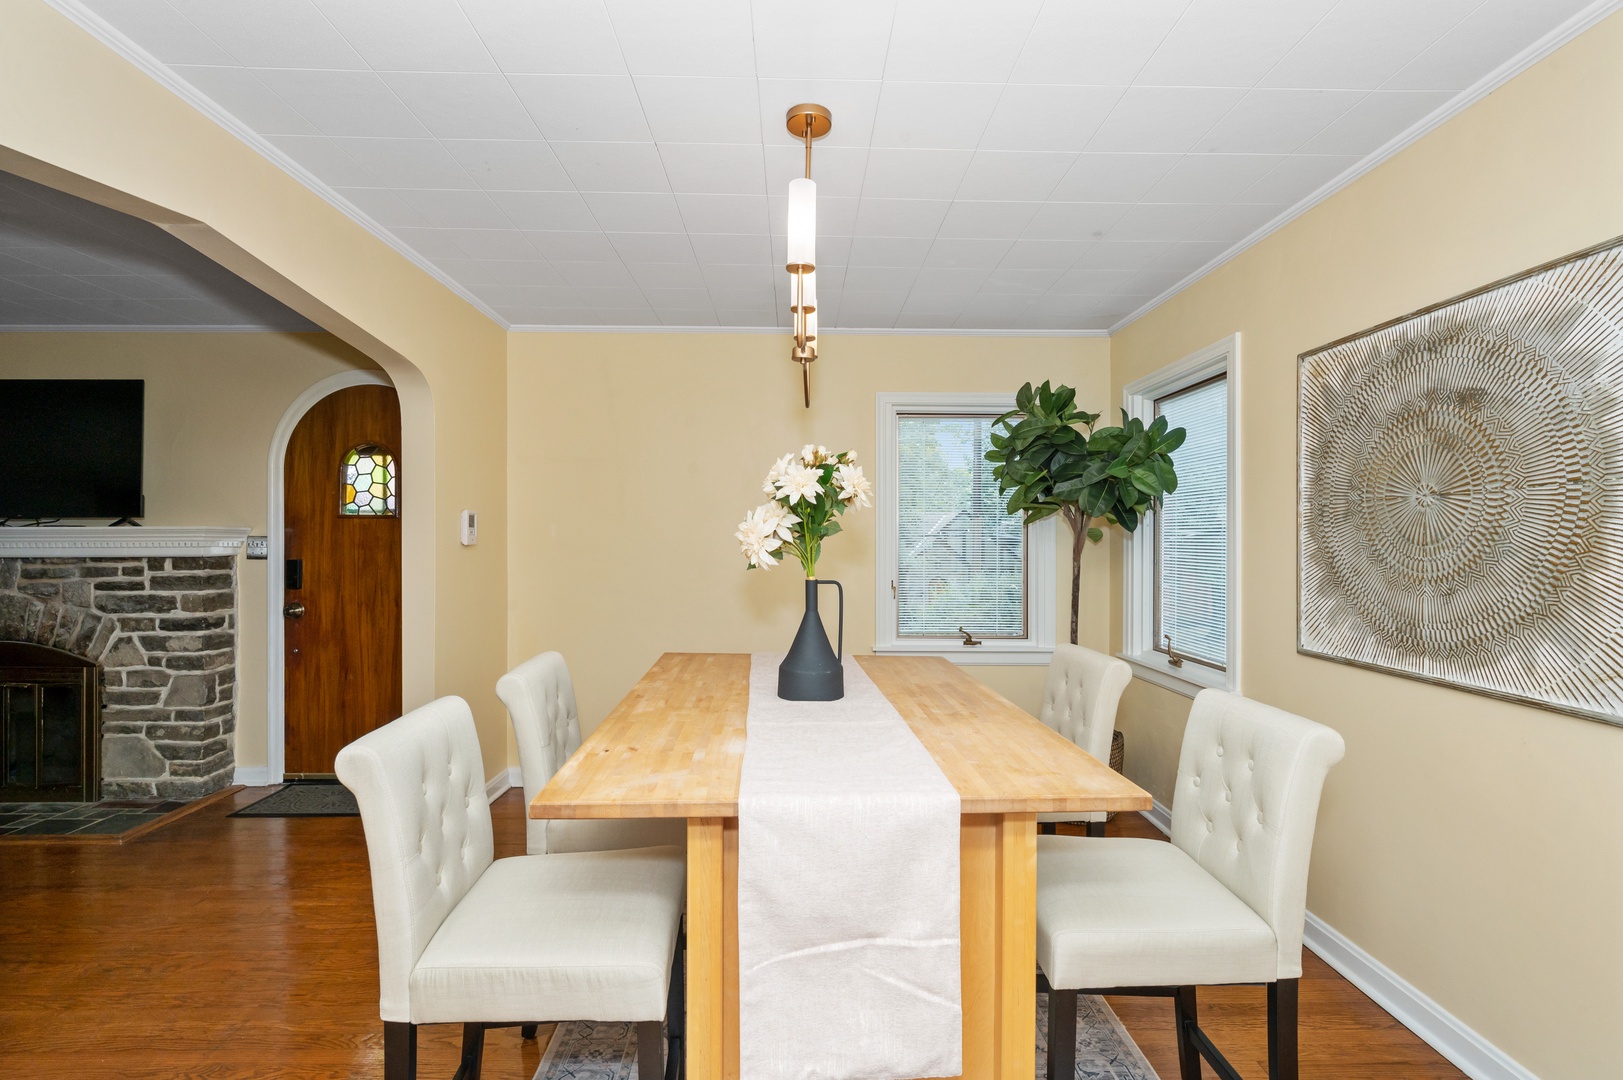 Elegant meals can be enjoyed at the dining table, offering seating for 4